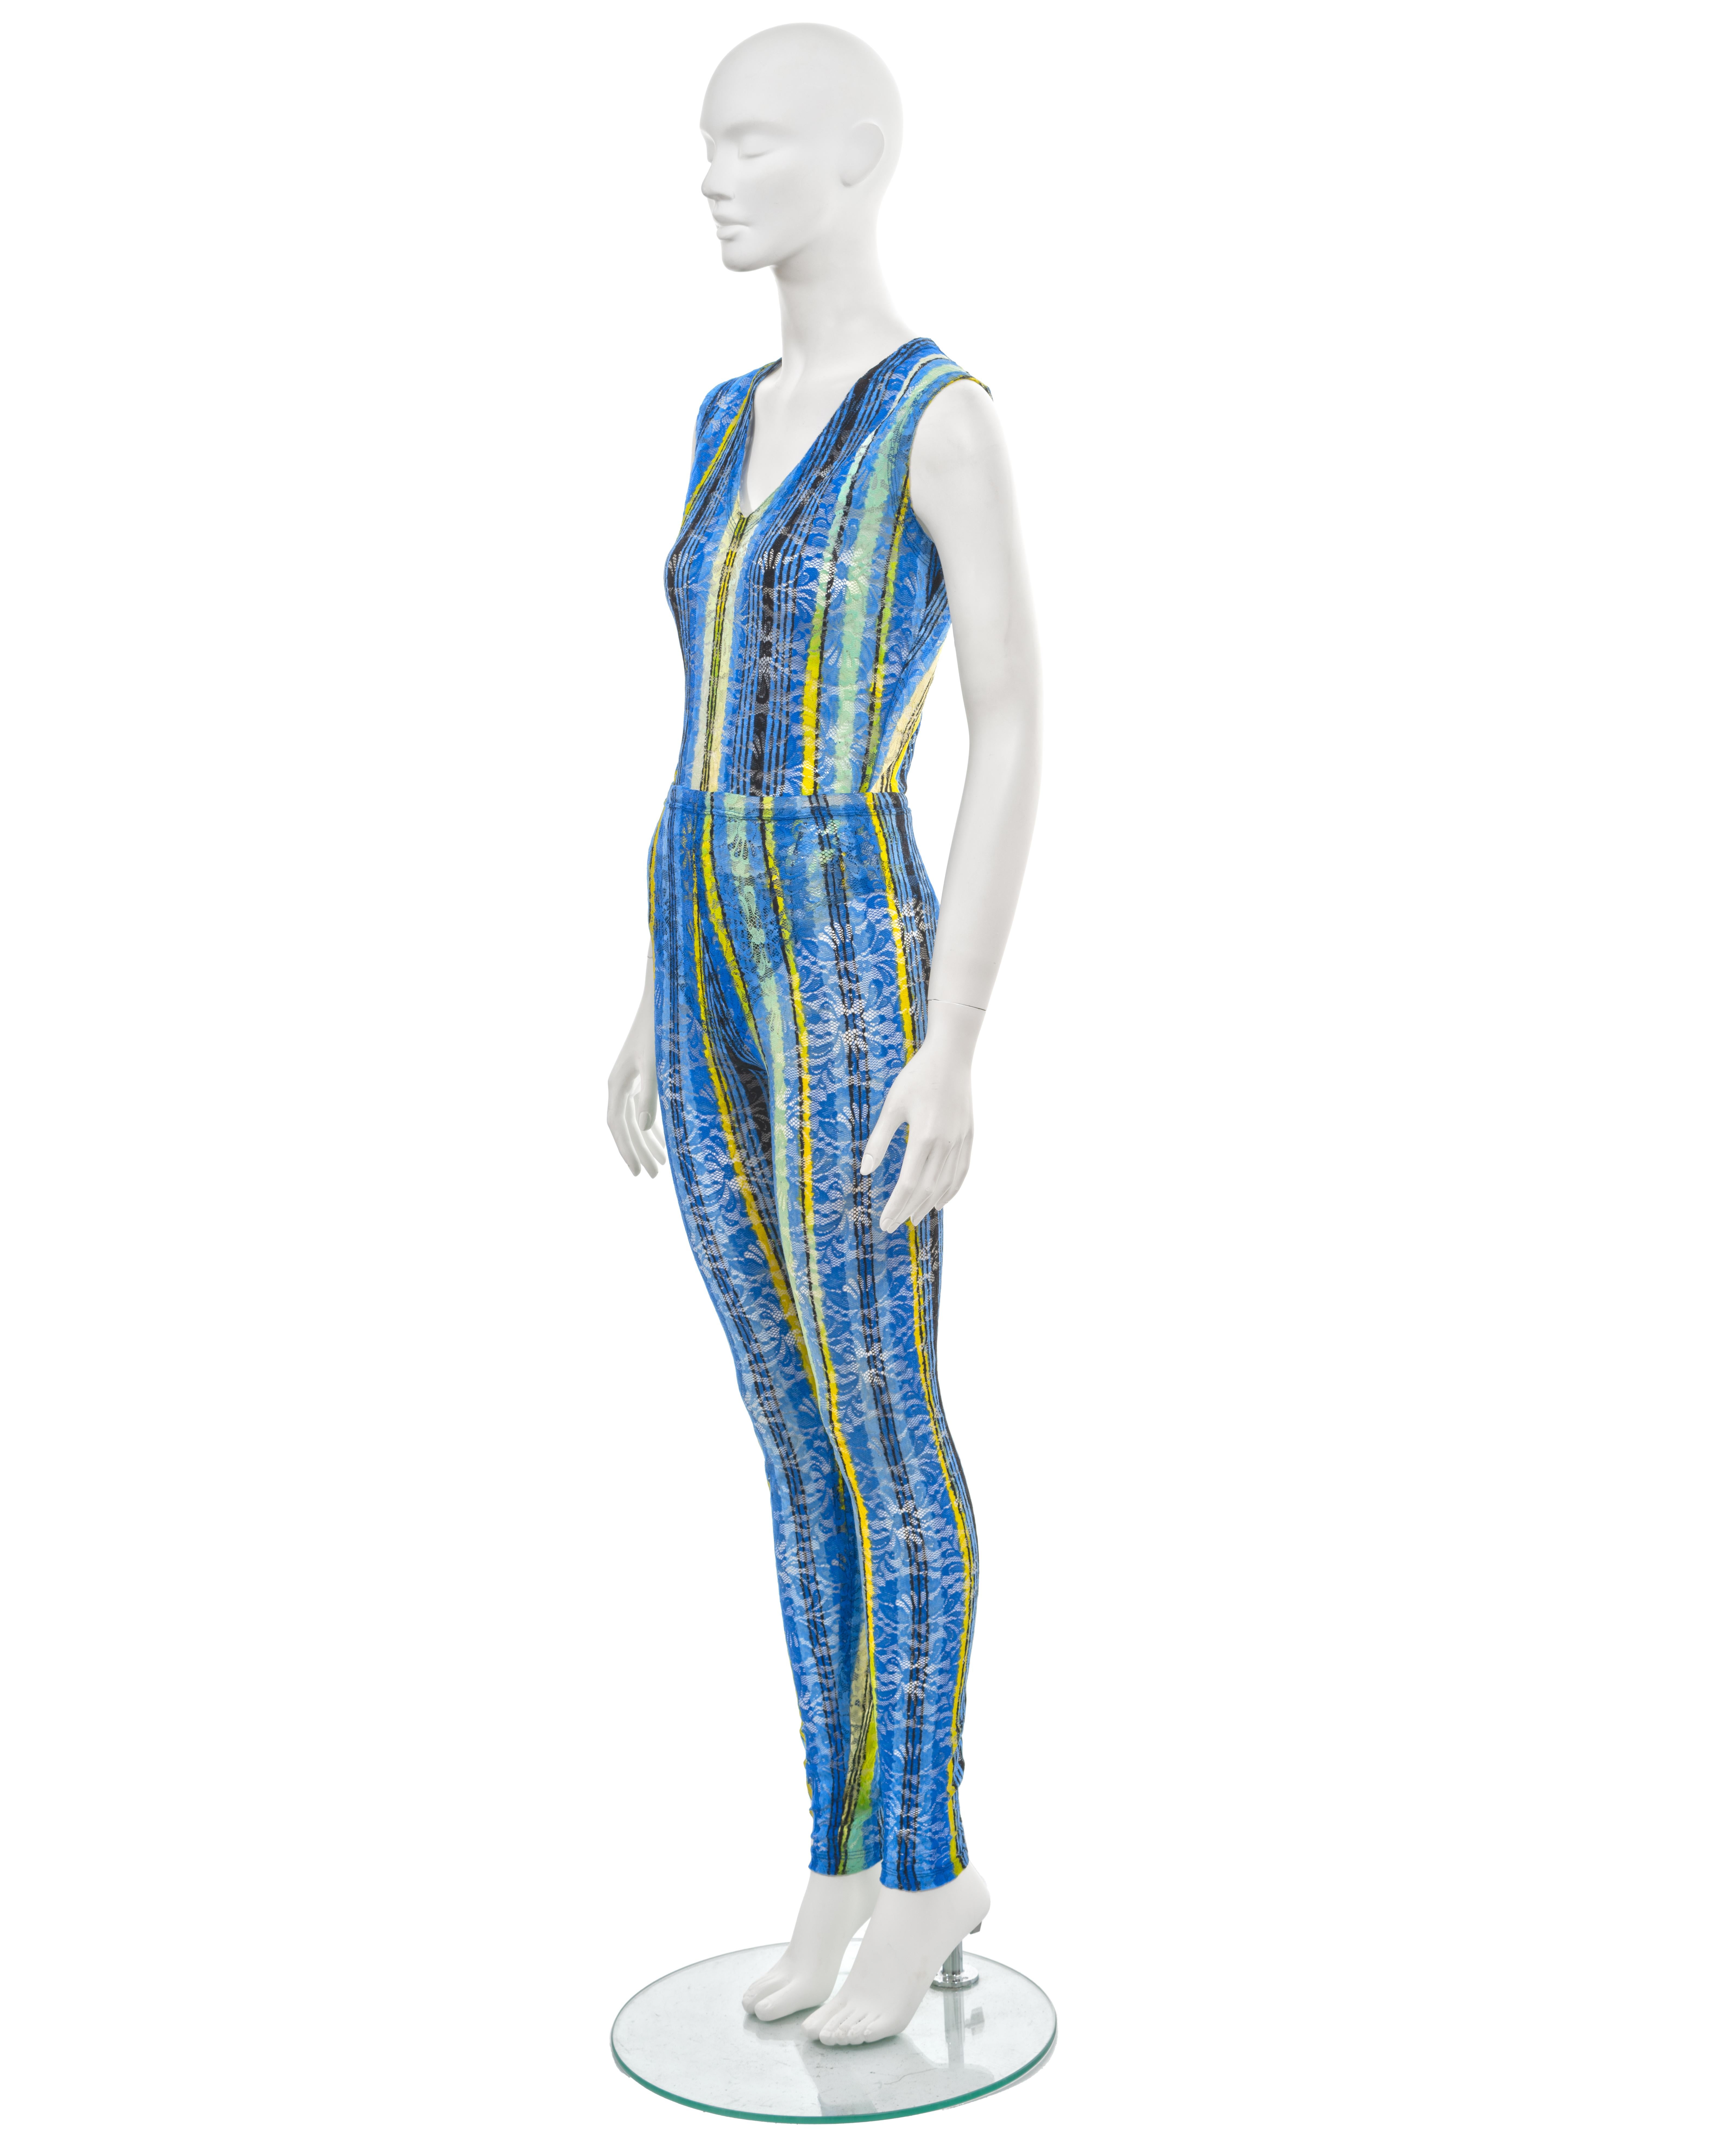 Gianni Versace blue lace bodysuit and leggings set, fw 1993 For Sale 2